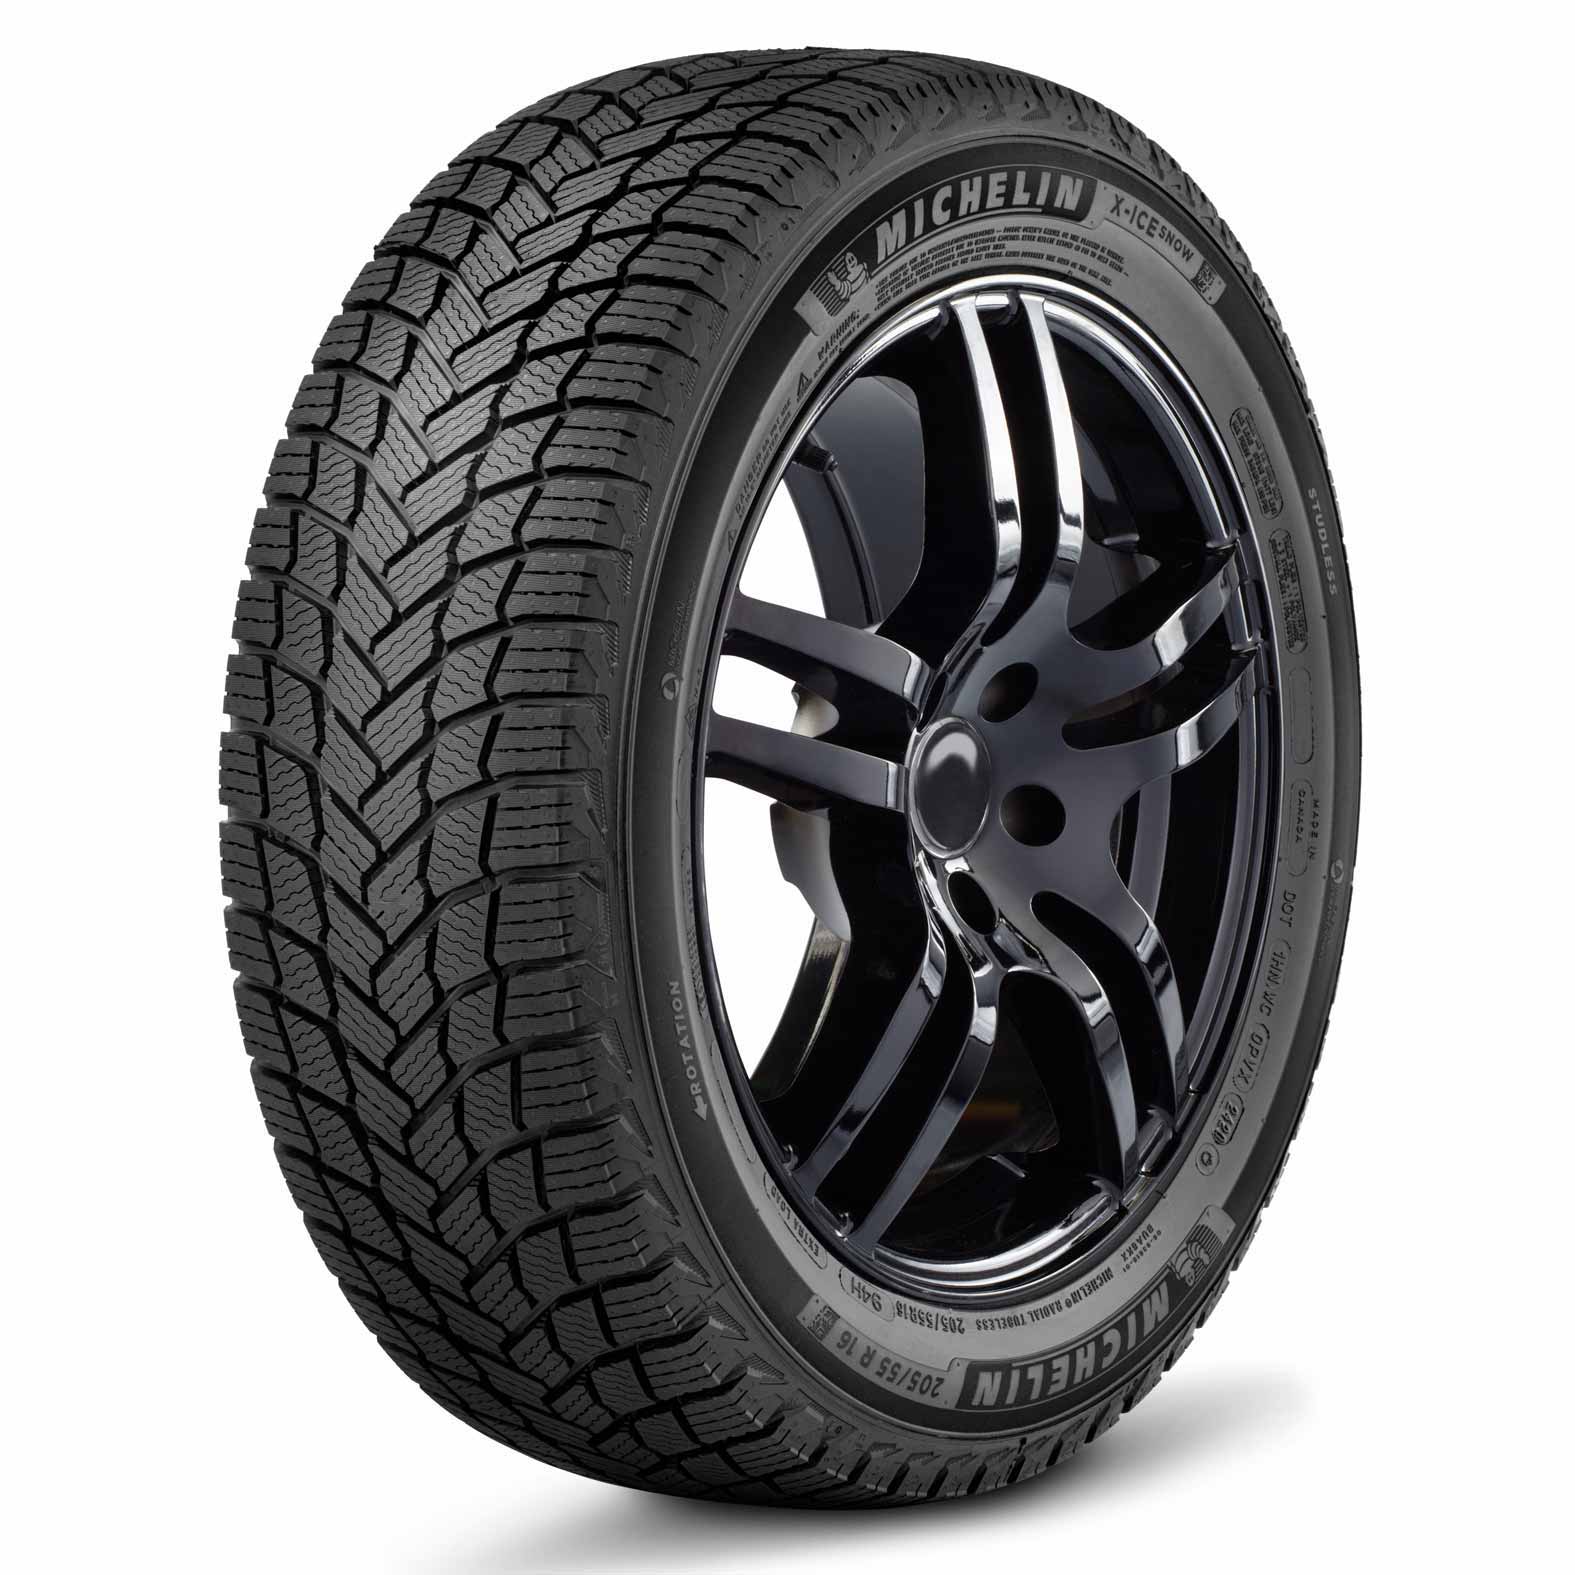 Tire X-Ice for | Kal Winter Tire Snow Michelin